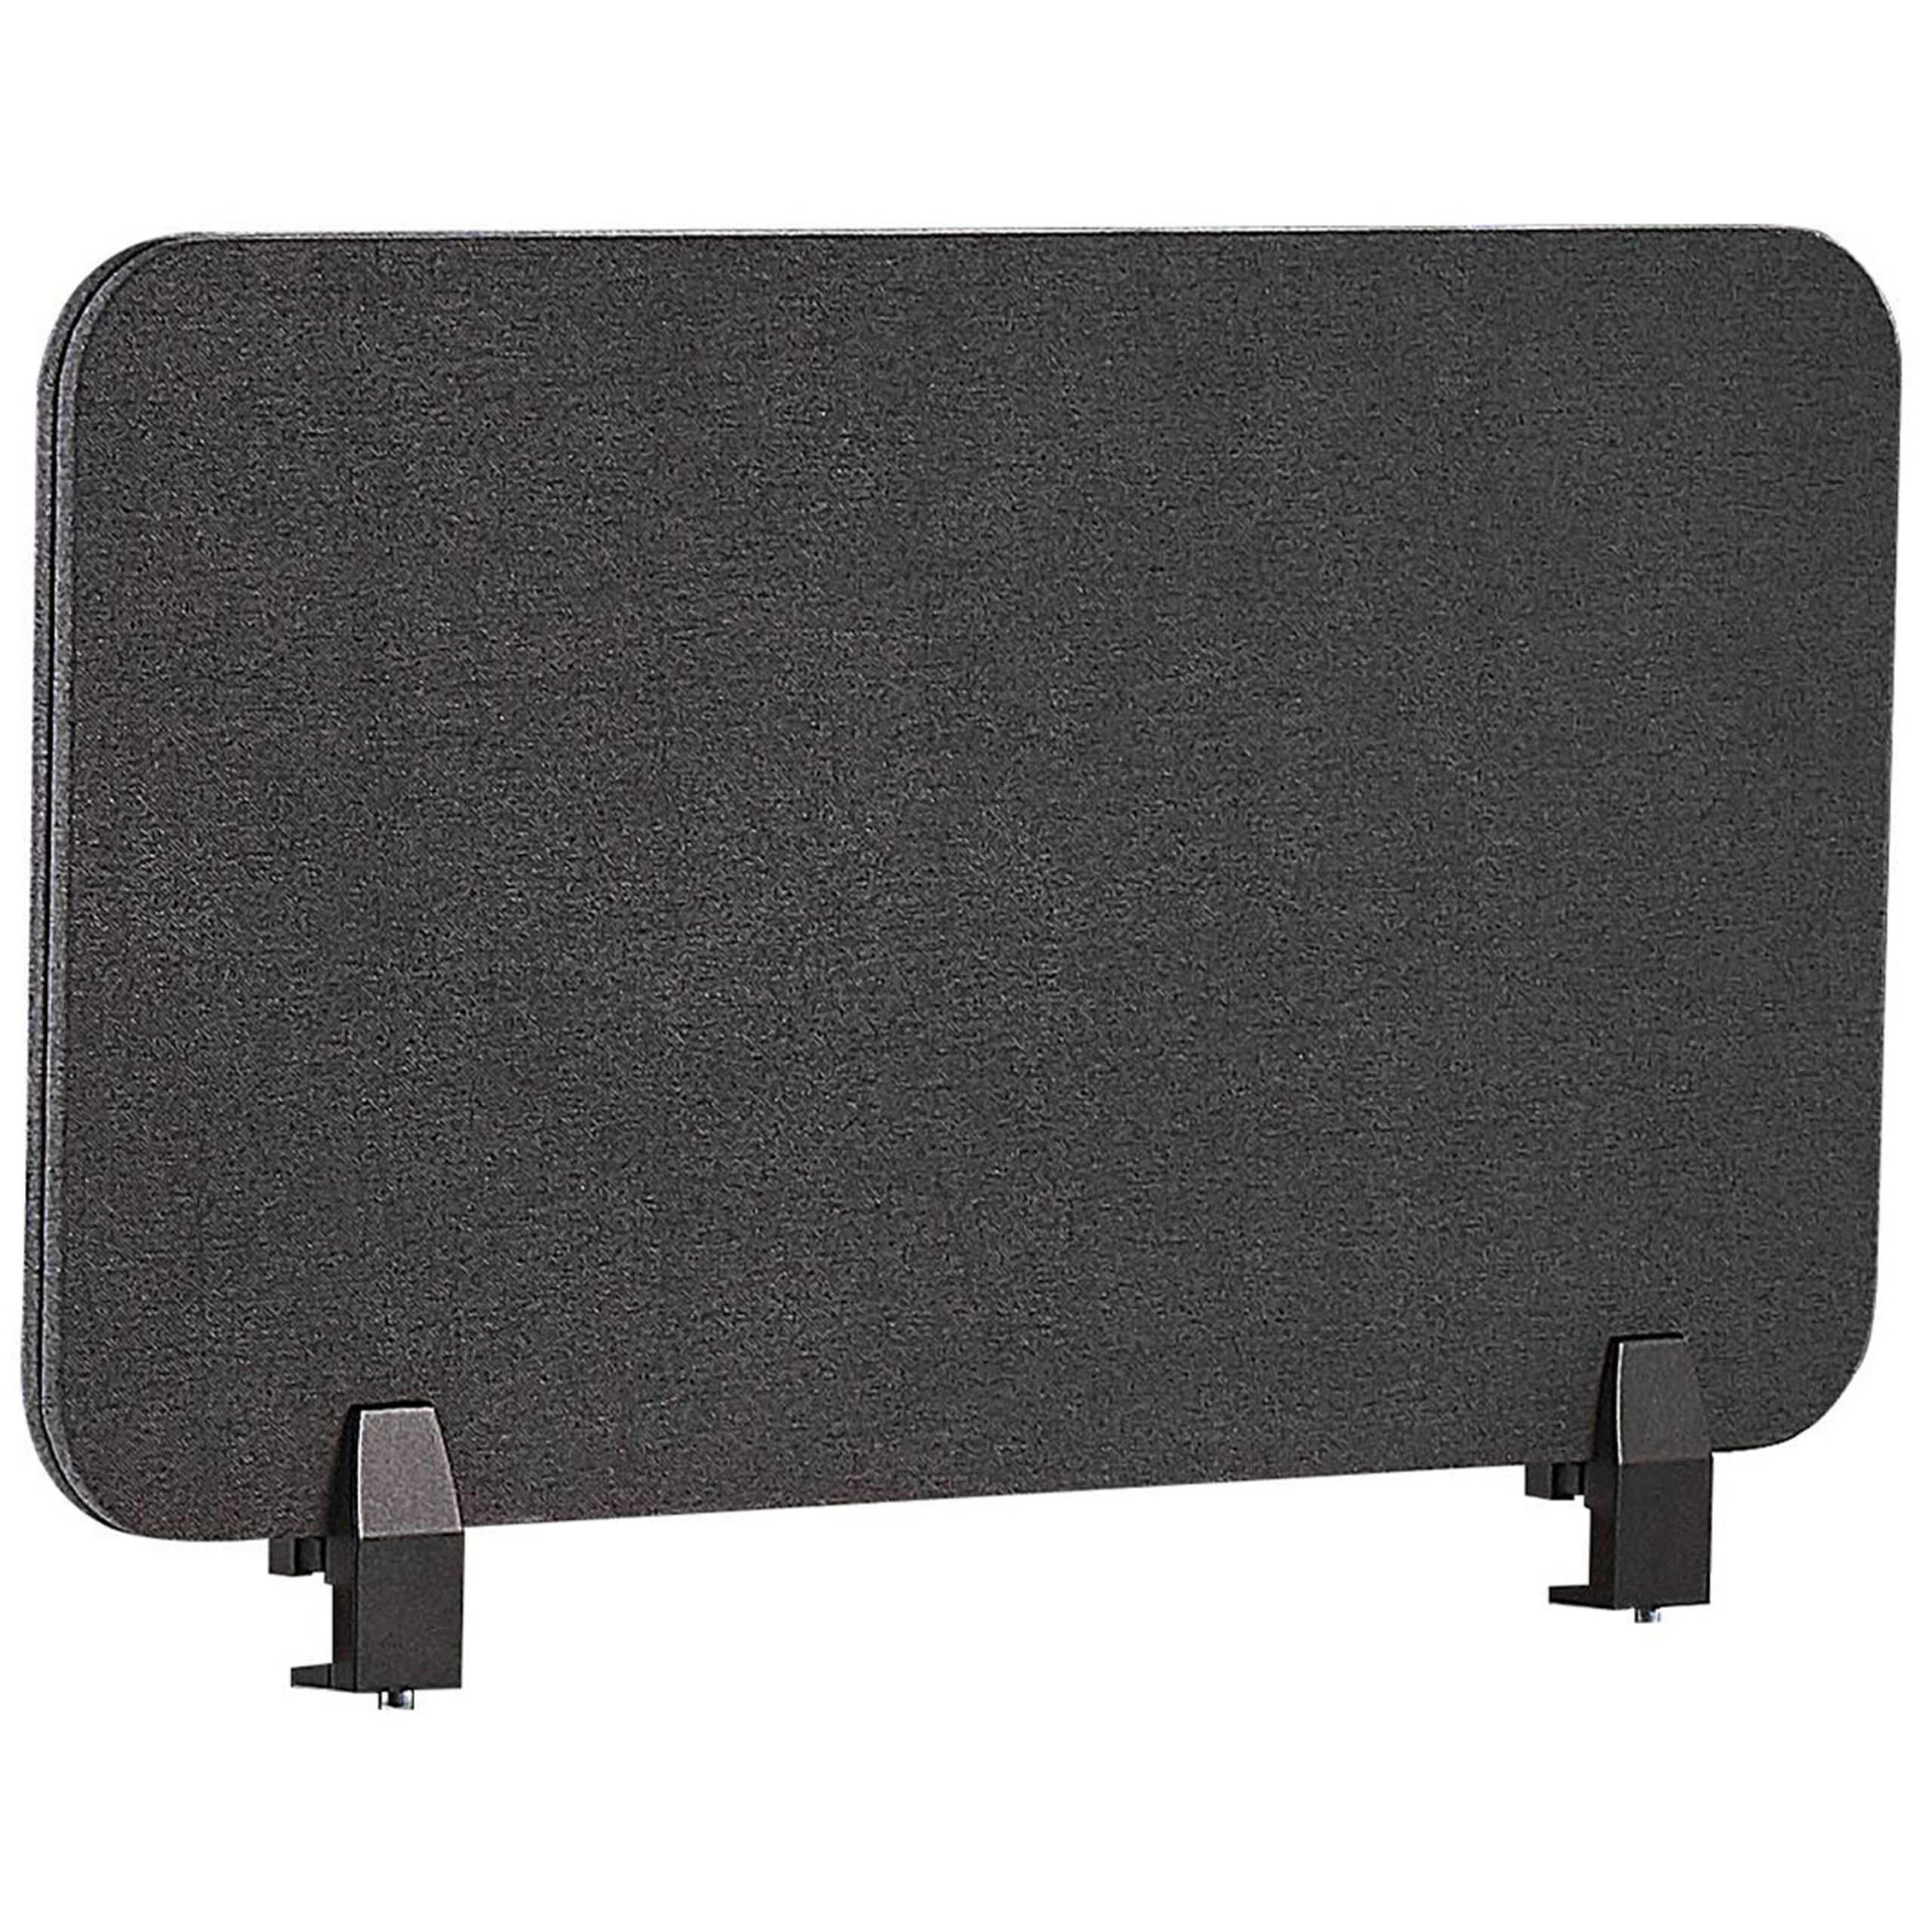 Beliani Desk Screen Dark Grey PET Board Fabric Cover 72 x 40 cm Acoustic Screen Modular Mounting Clamps Home Office Material:Polyester Size:2x40x72